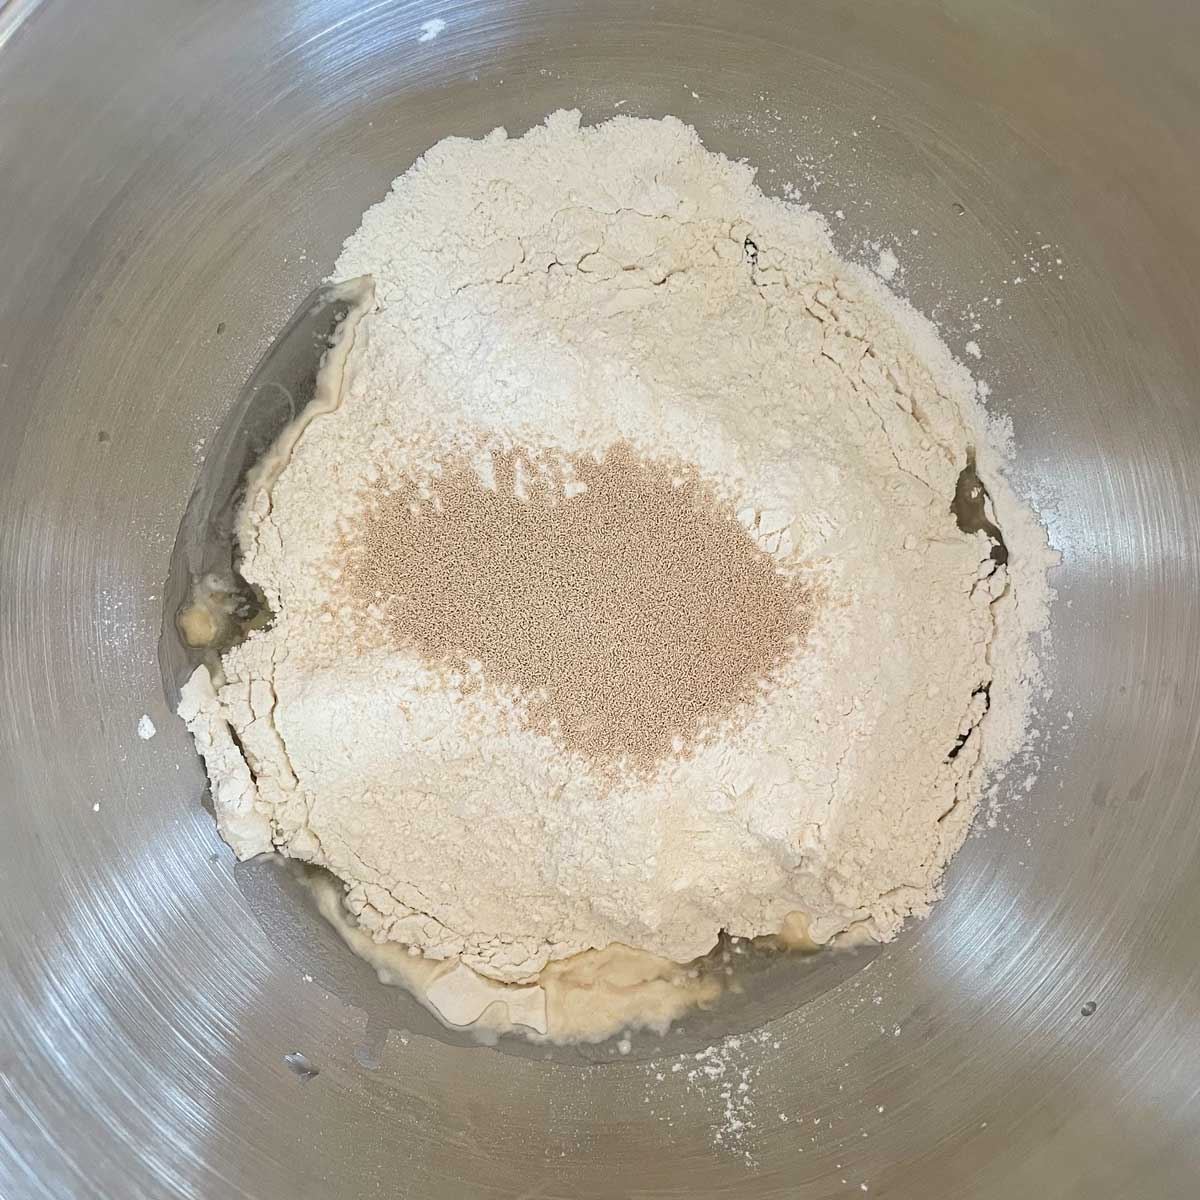 Pizza dough ingredients in a stand mixer bowl.